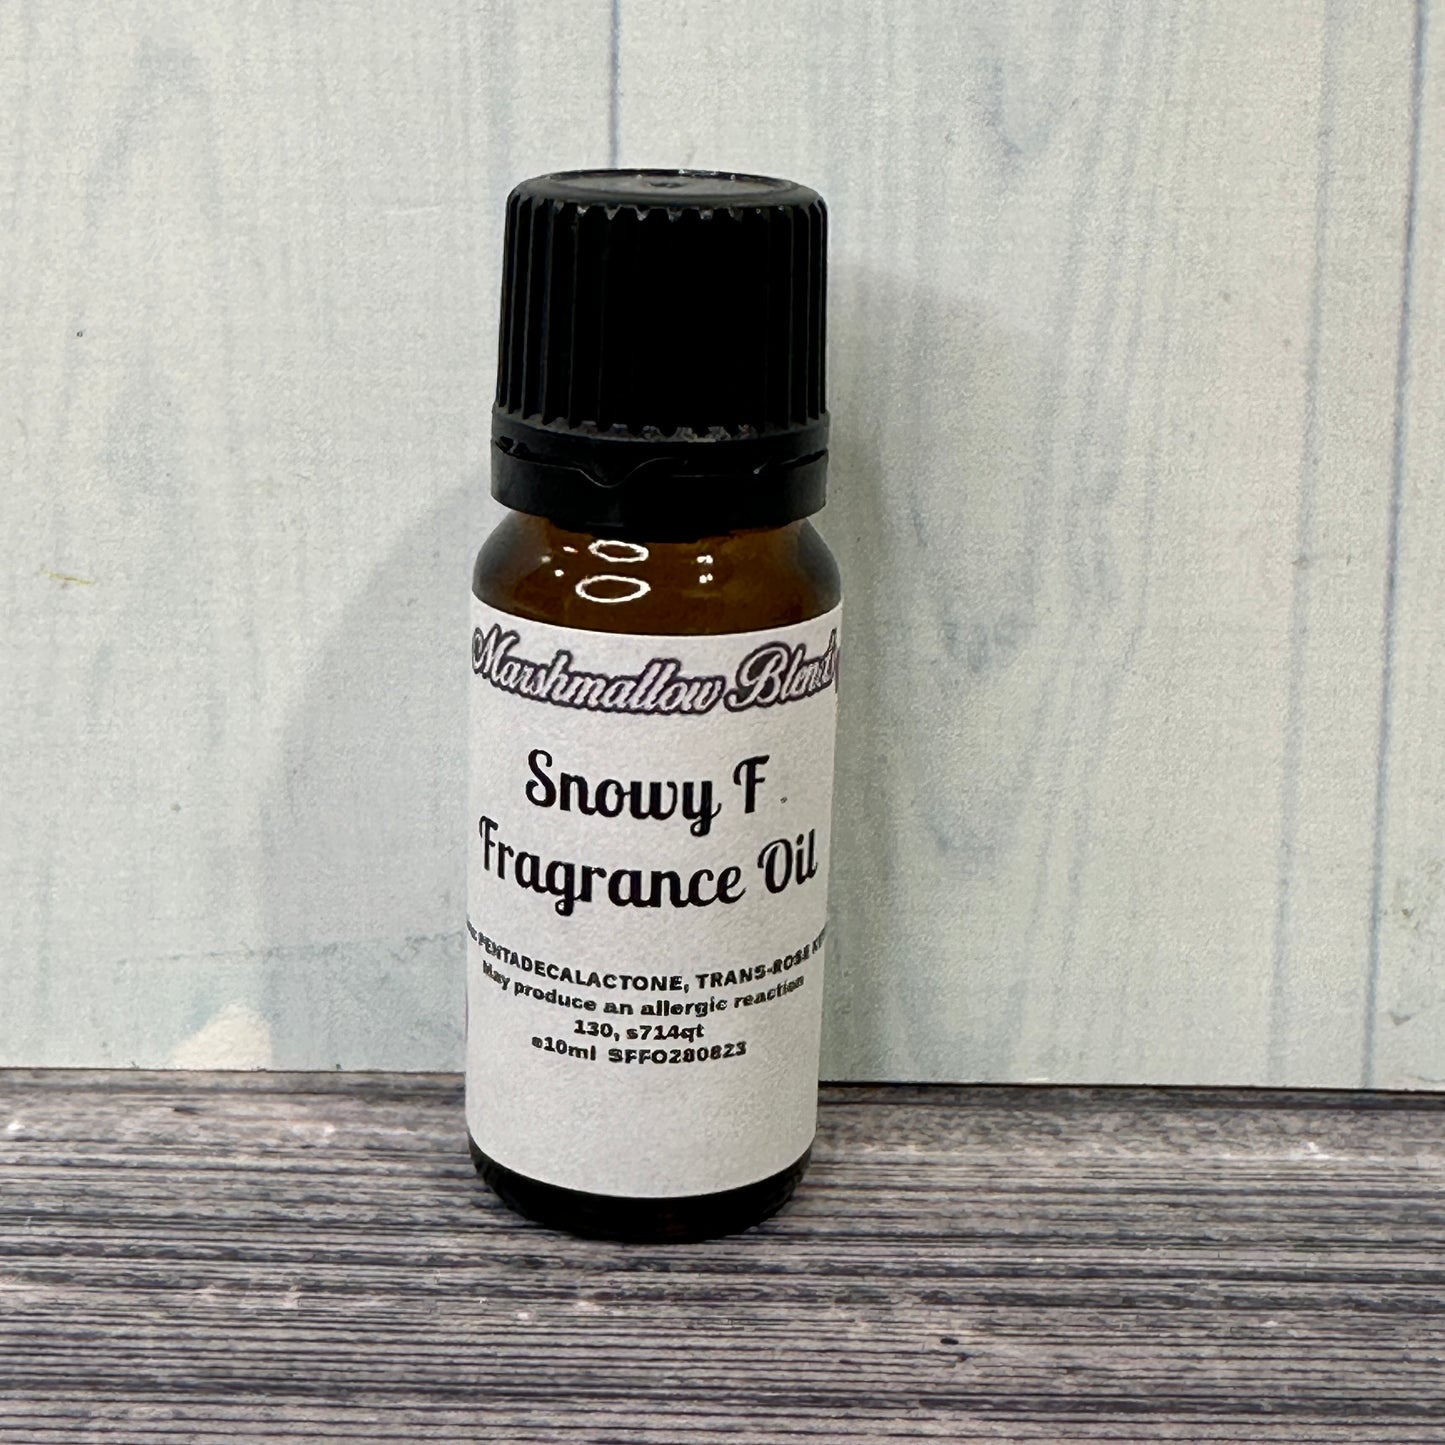 Snowy F Fragrance Oils for Diffusers